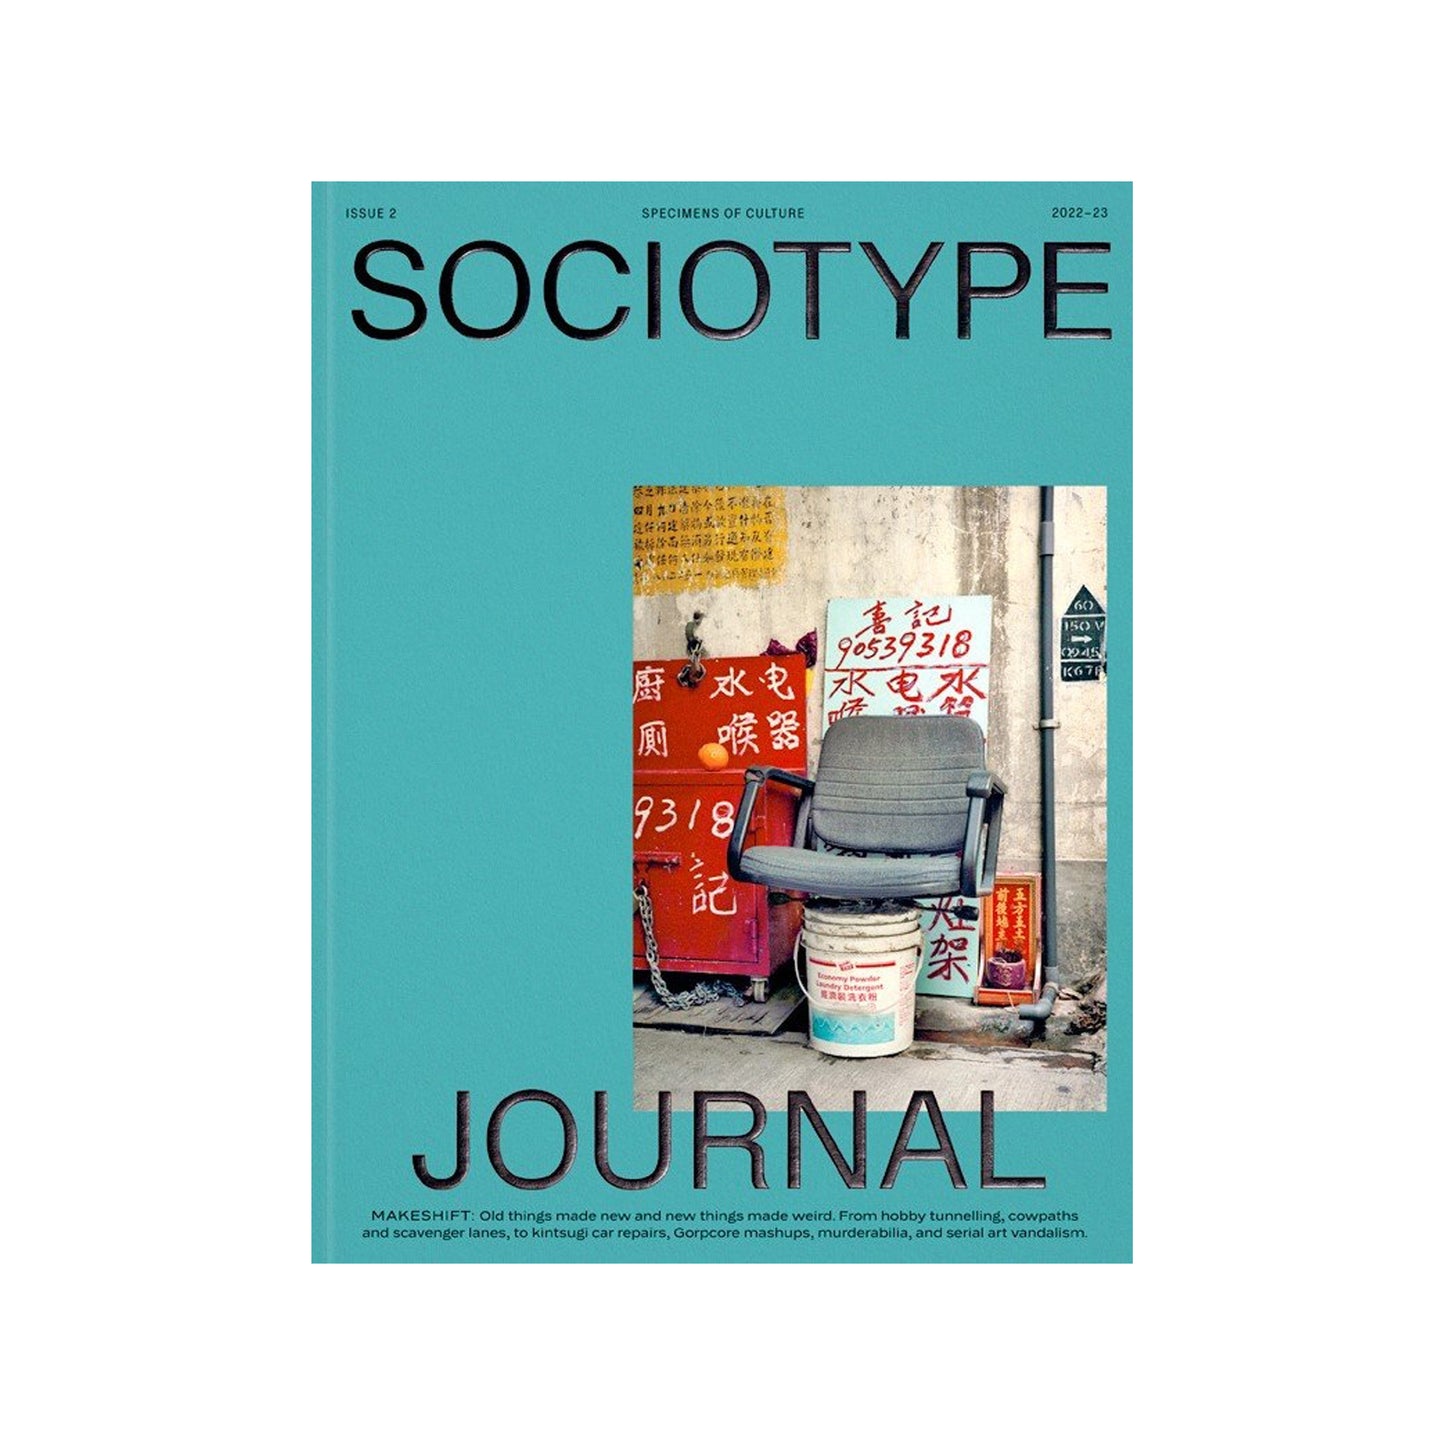 Sociotype Journal - ISSUE 2